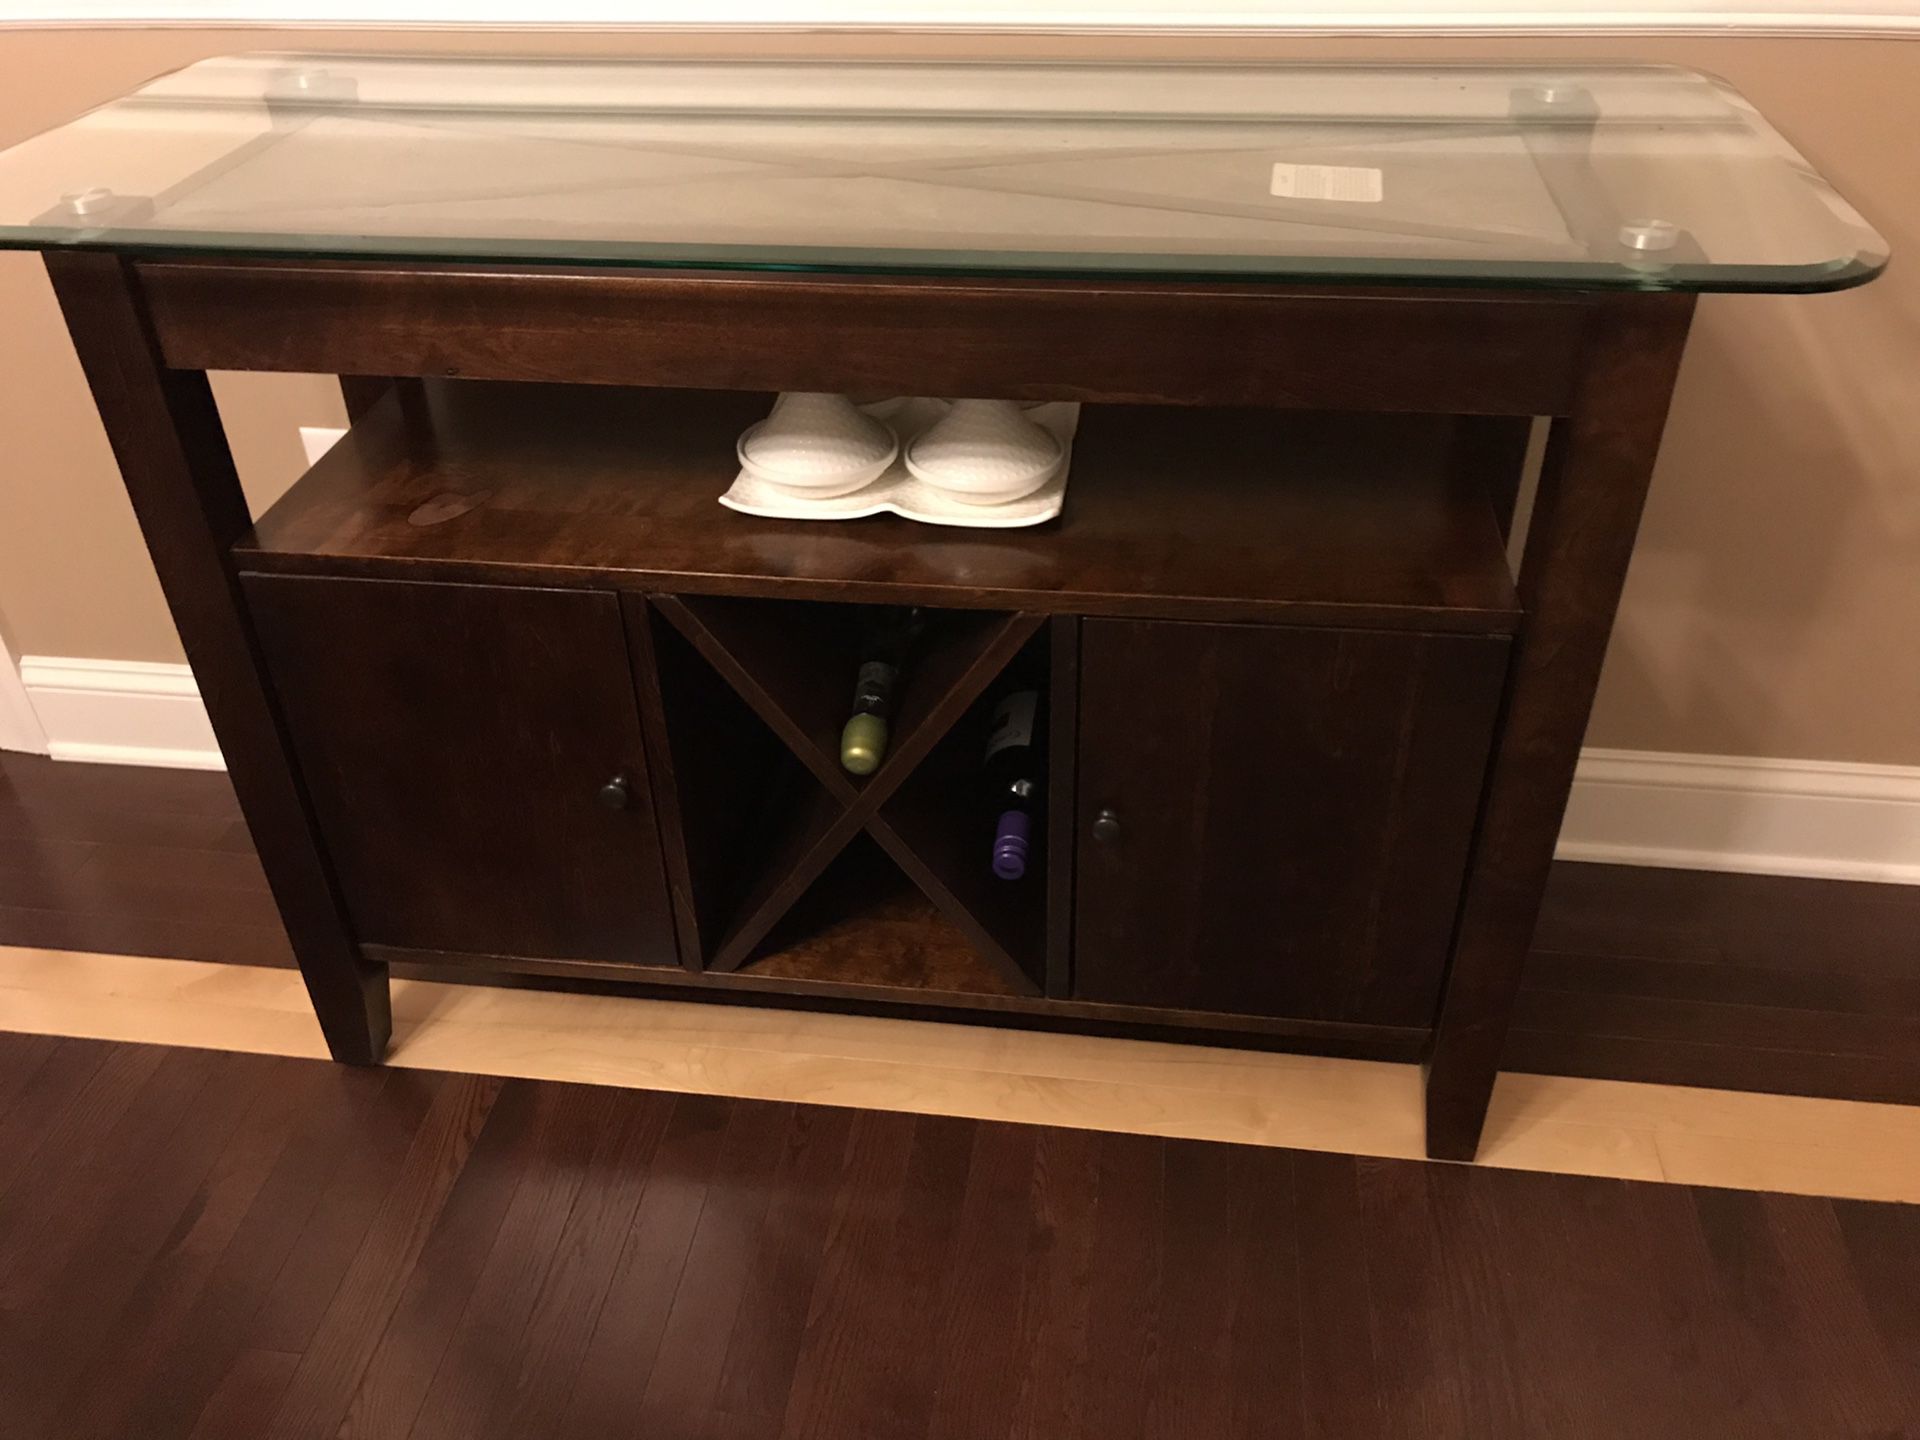 Buffet table with stone and glass top, 4 bottle wine holder